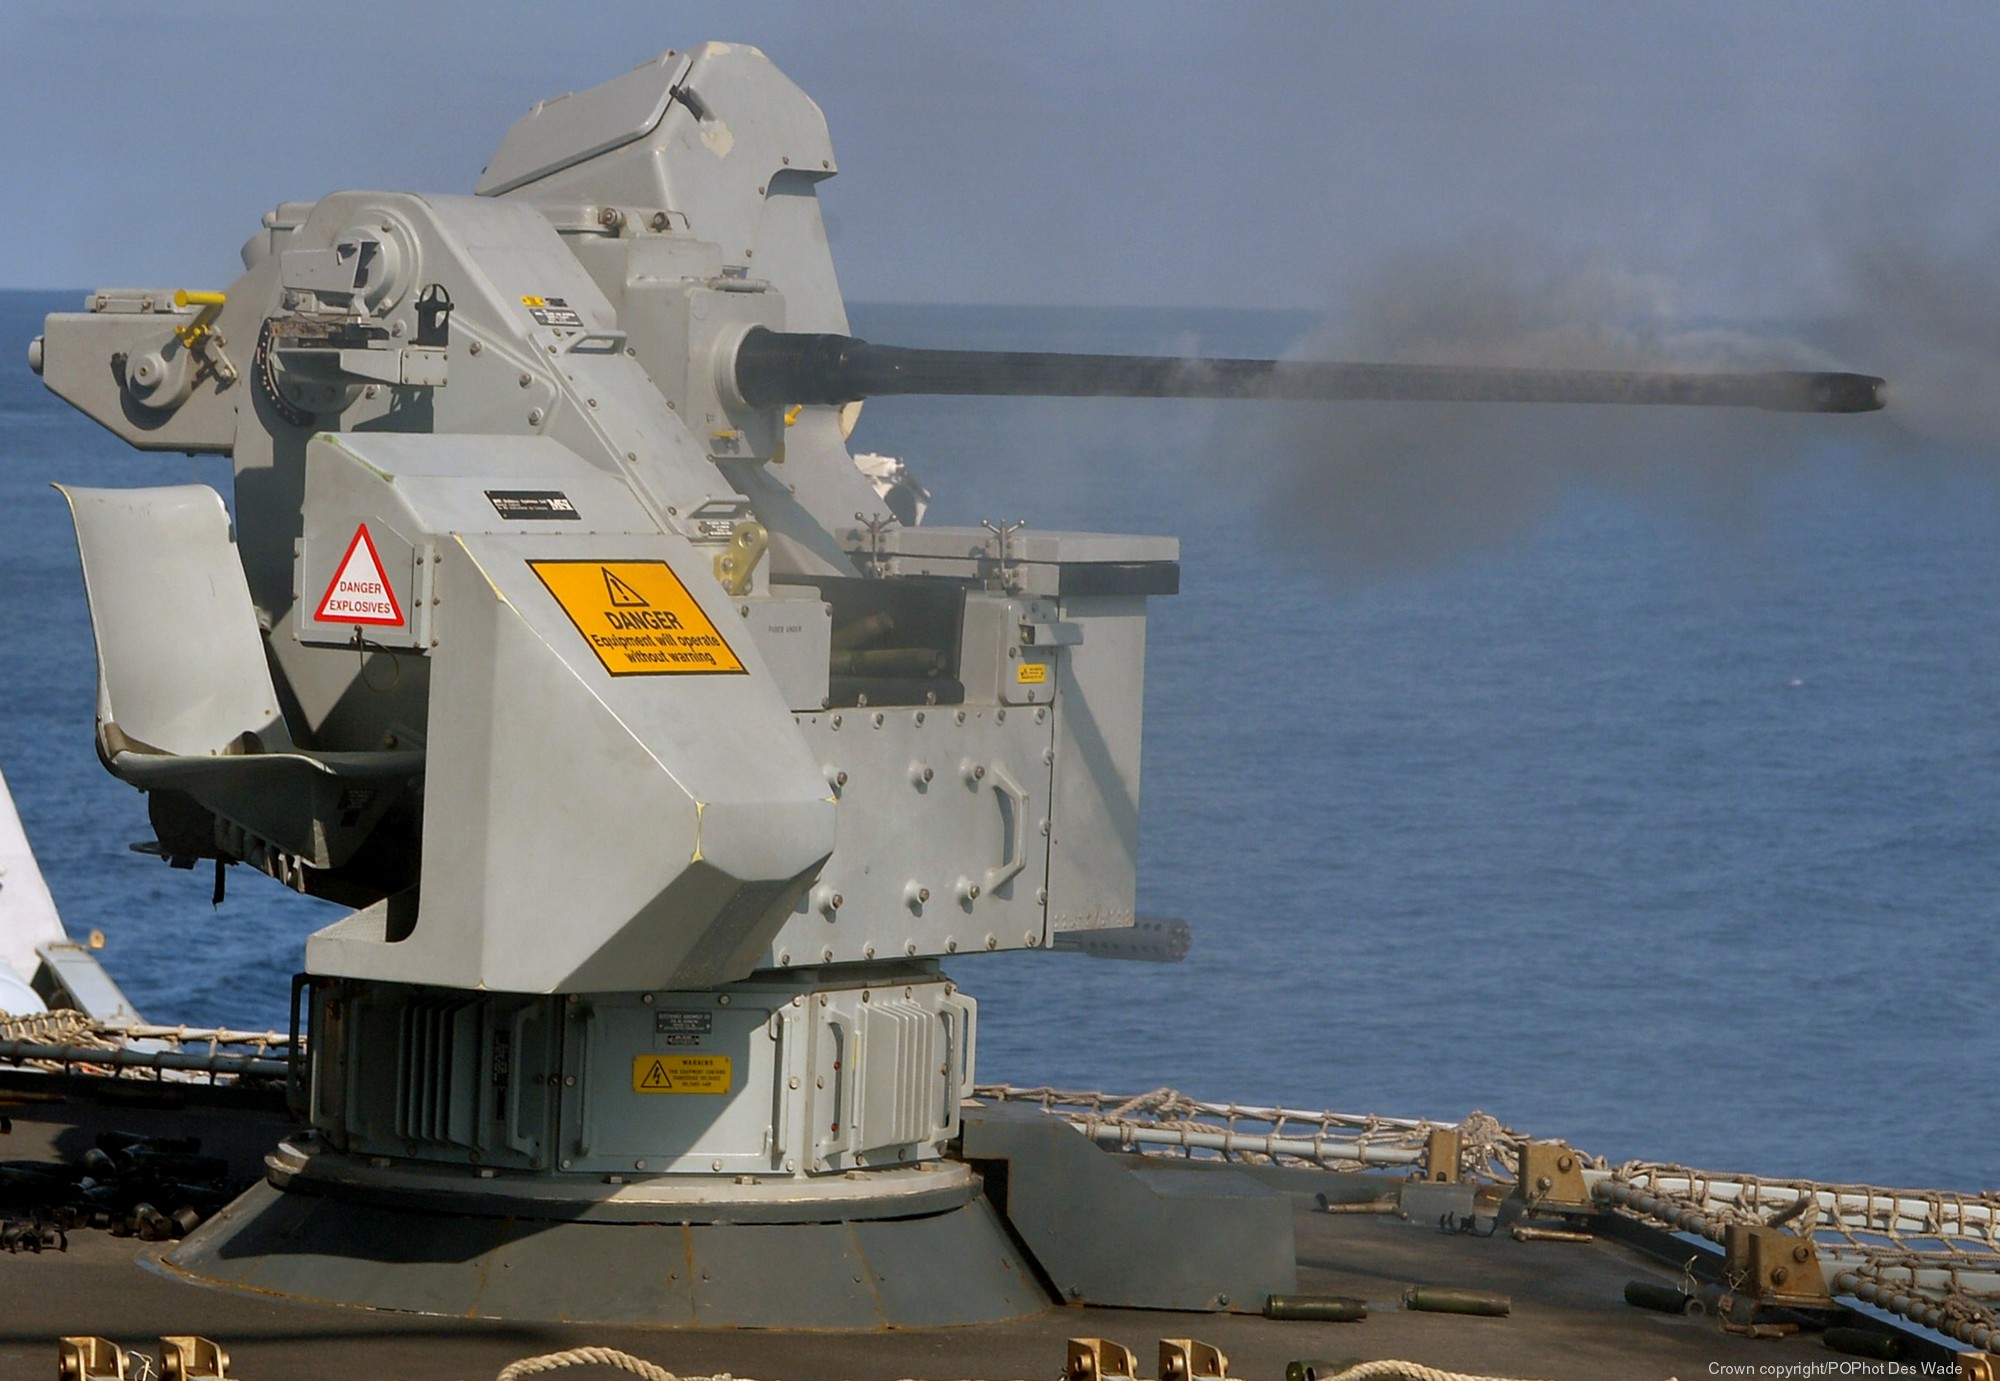 ds30b mark-1 rapid fire cannon 30mm daring class destroyer ddg royal navy 10